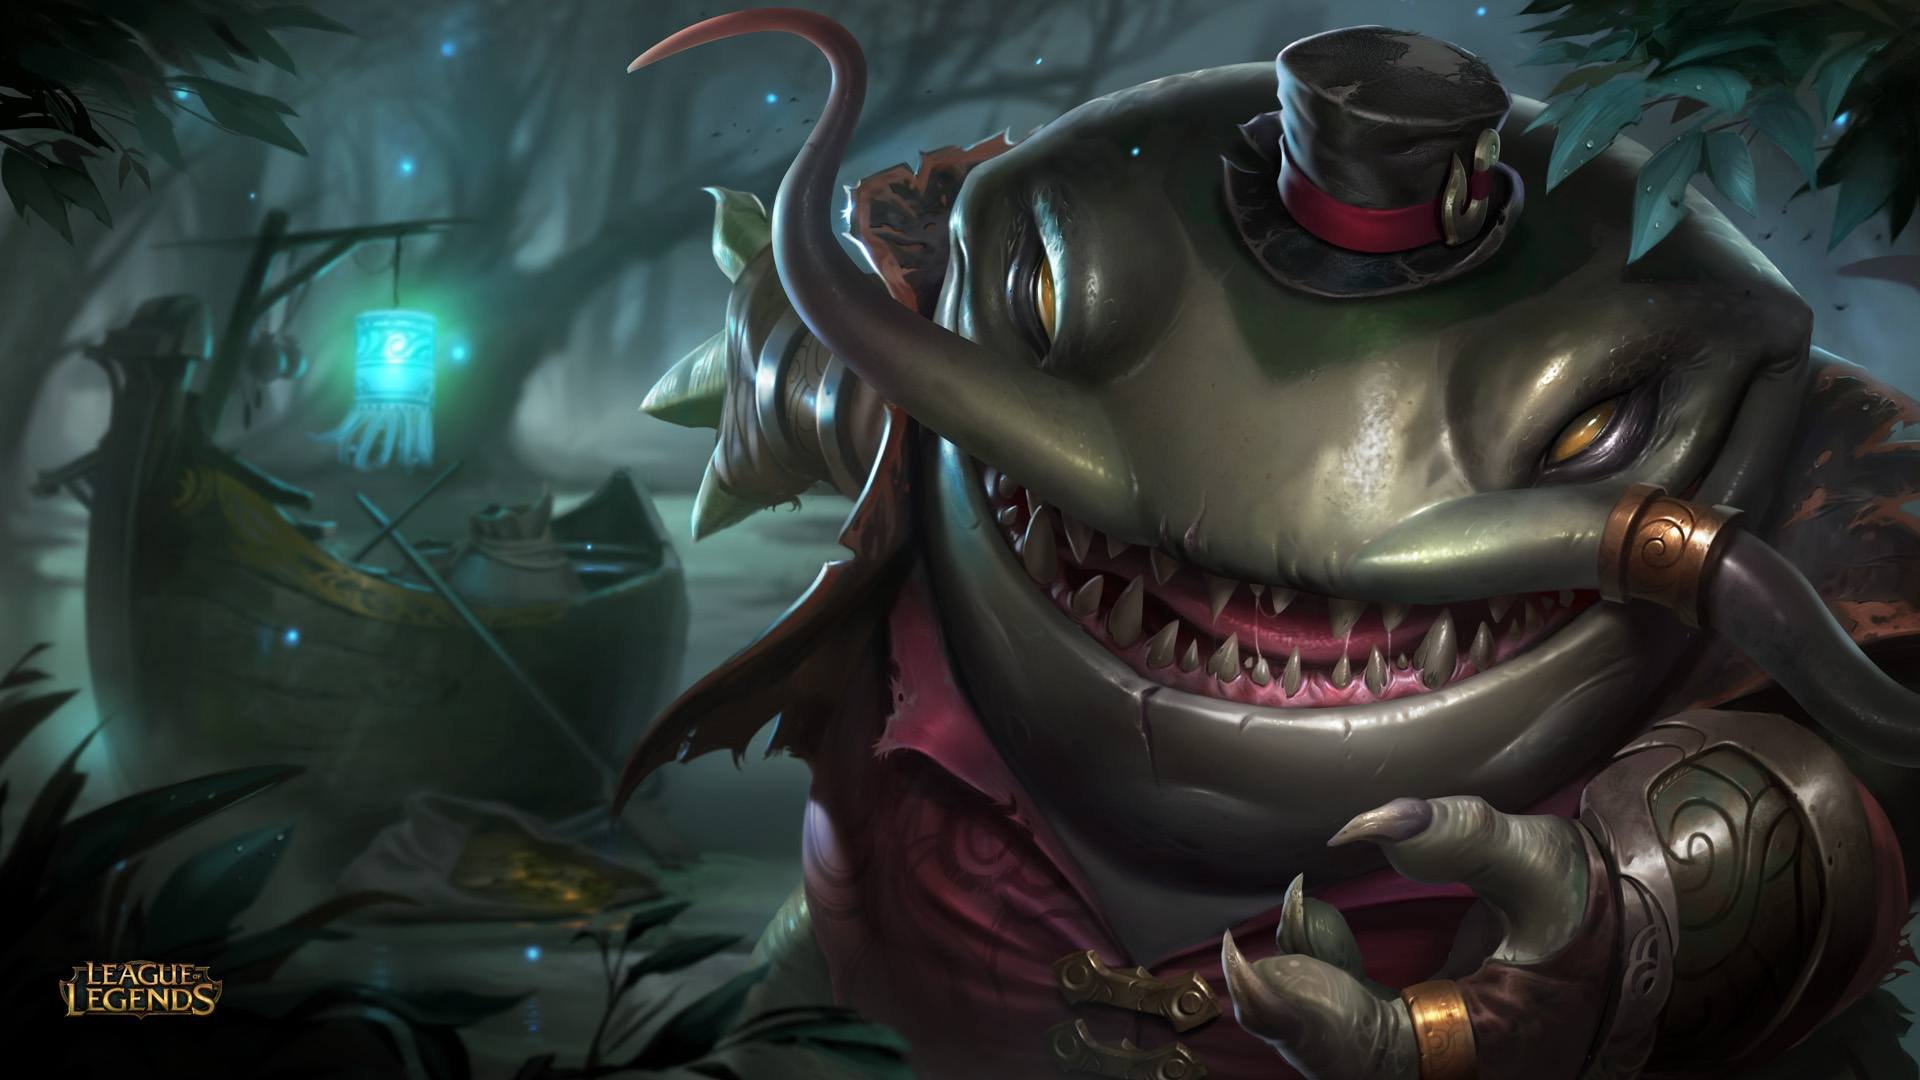 Runes tahm kench Tahm Kench